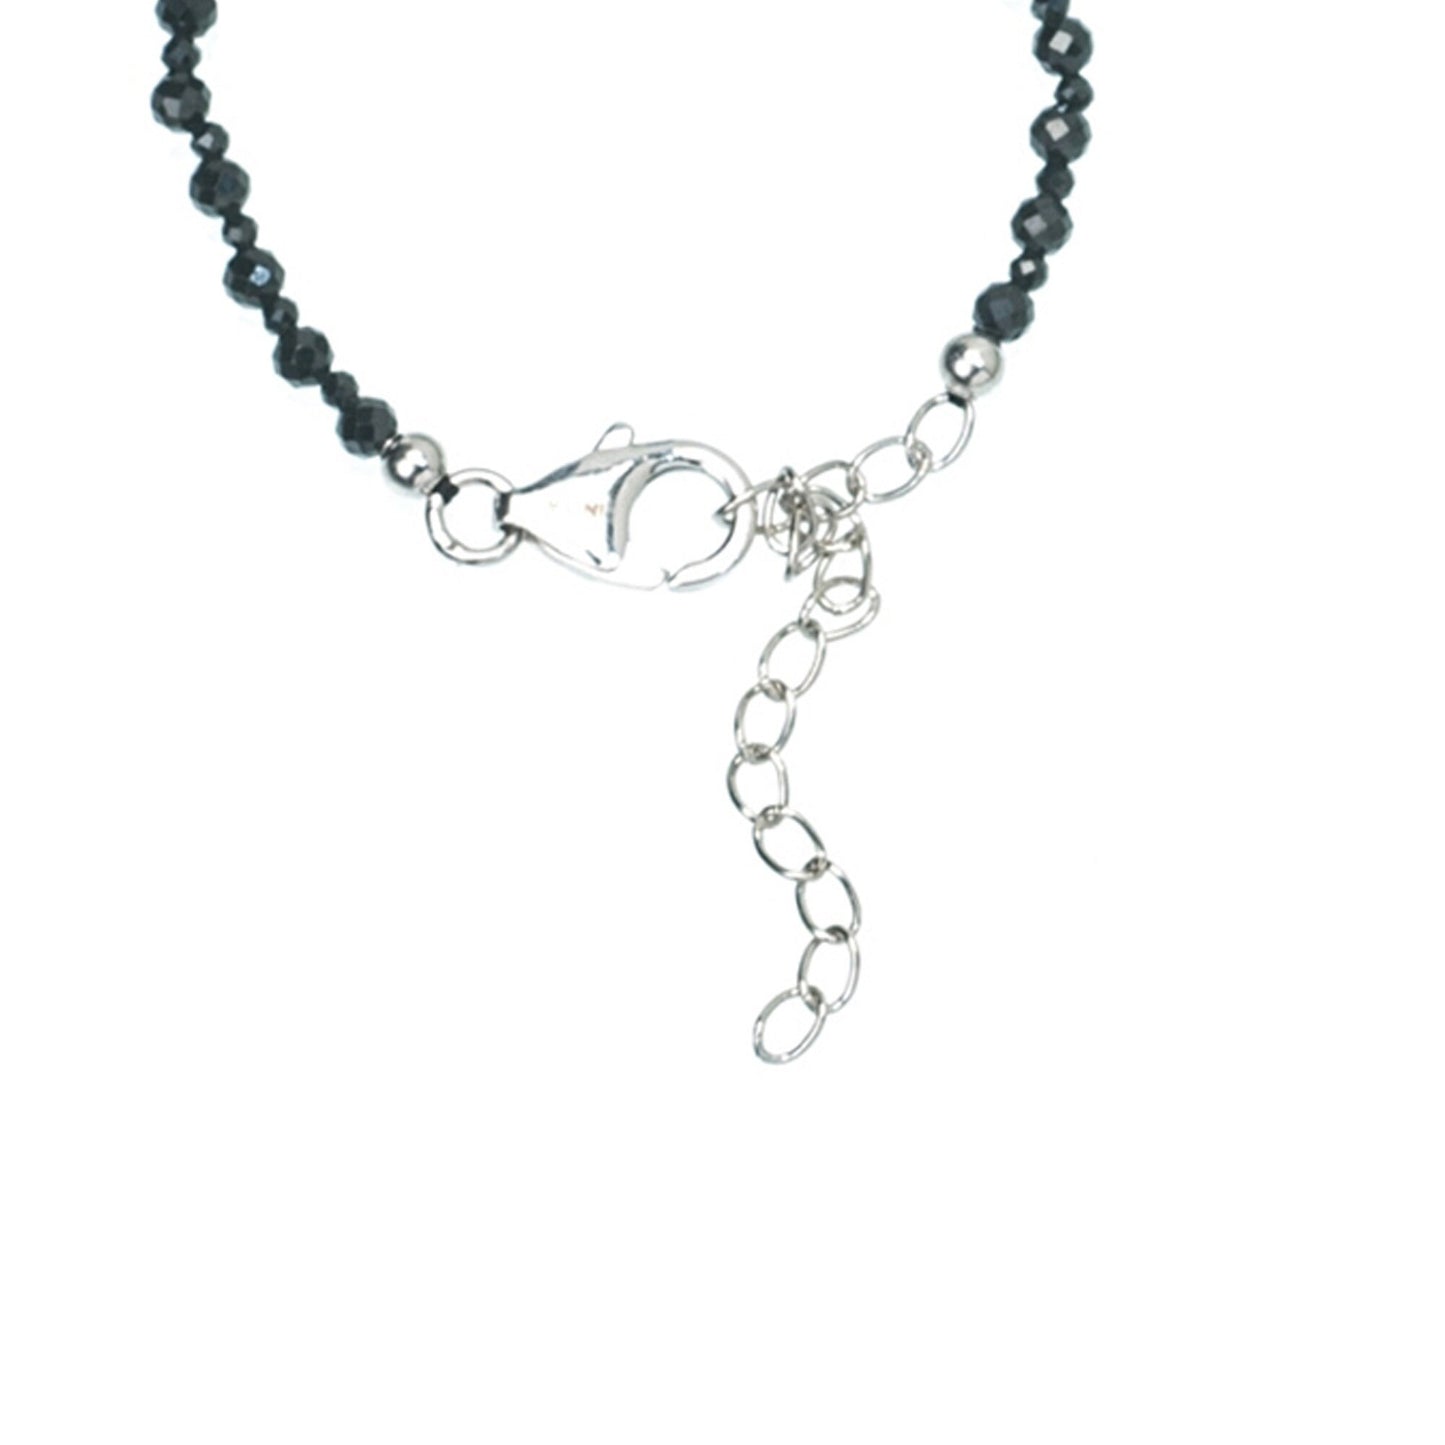 925 Sterling Silver Ruby,Black Spinel Necklace